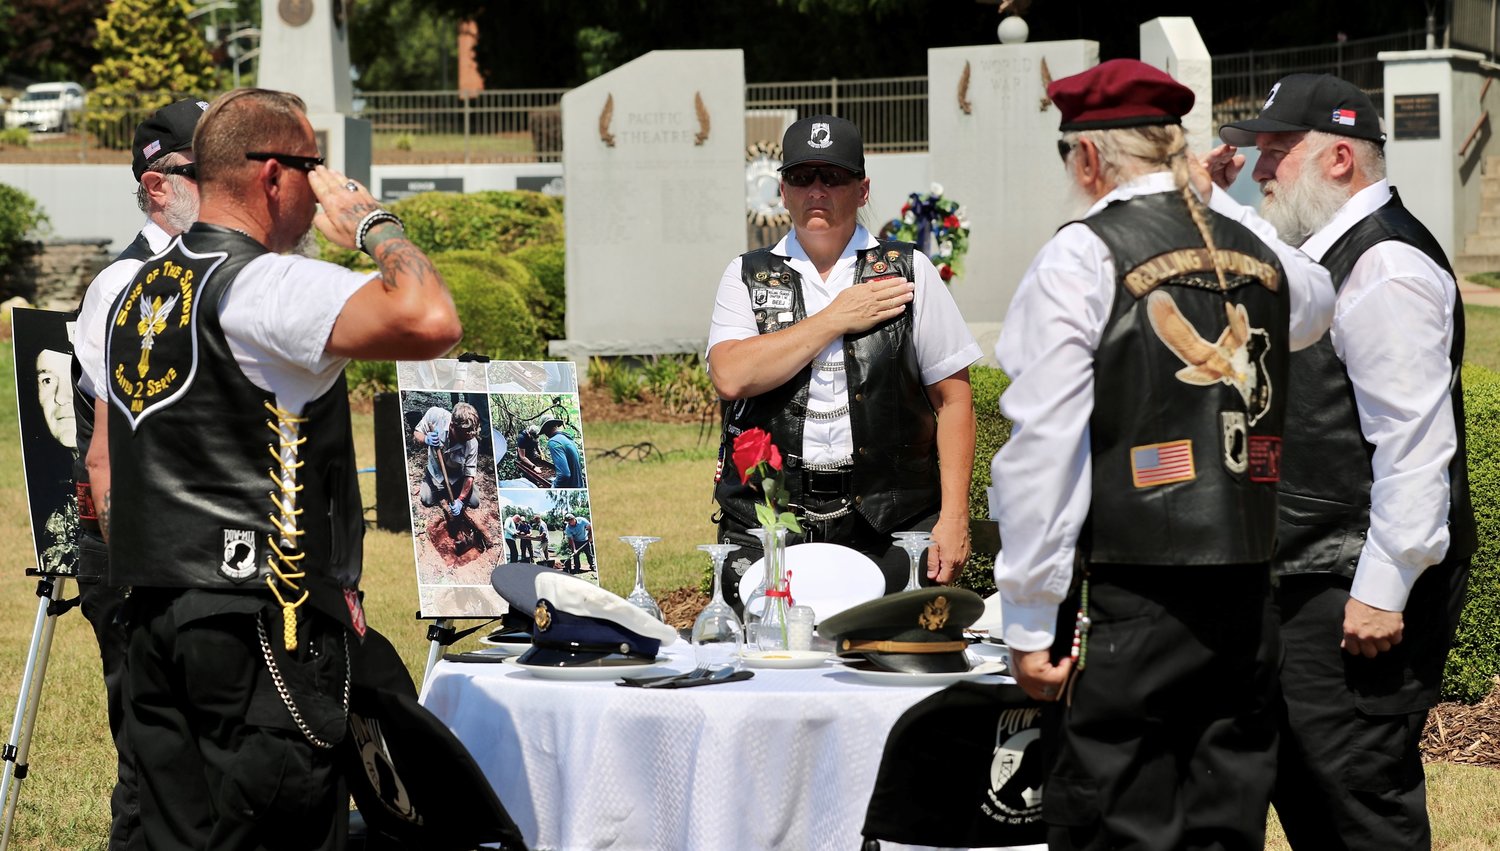 Members of Chapter One of Rolling Thunder place hats representing fallen service members at the Missing Man Presentation Table during a Memorial Day ceremony at Freedom Memorial Park.